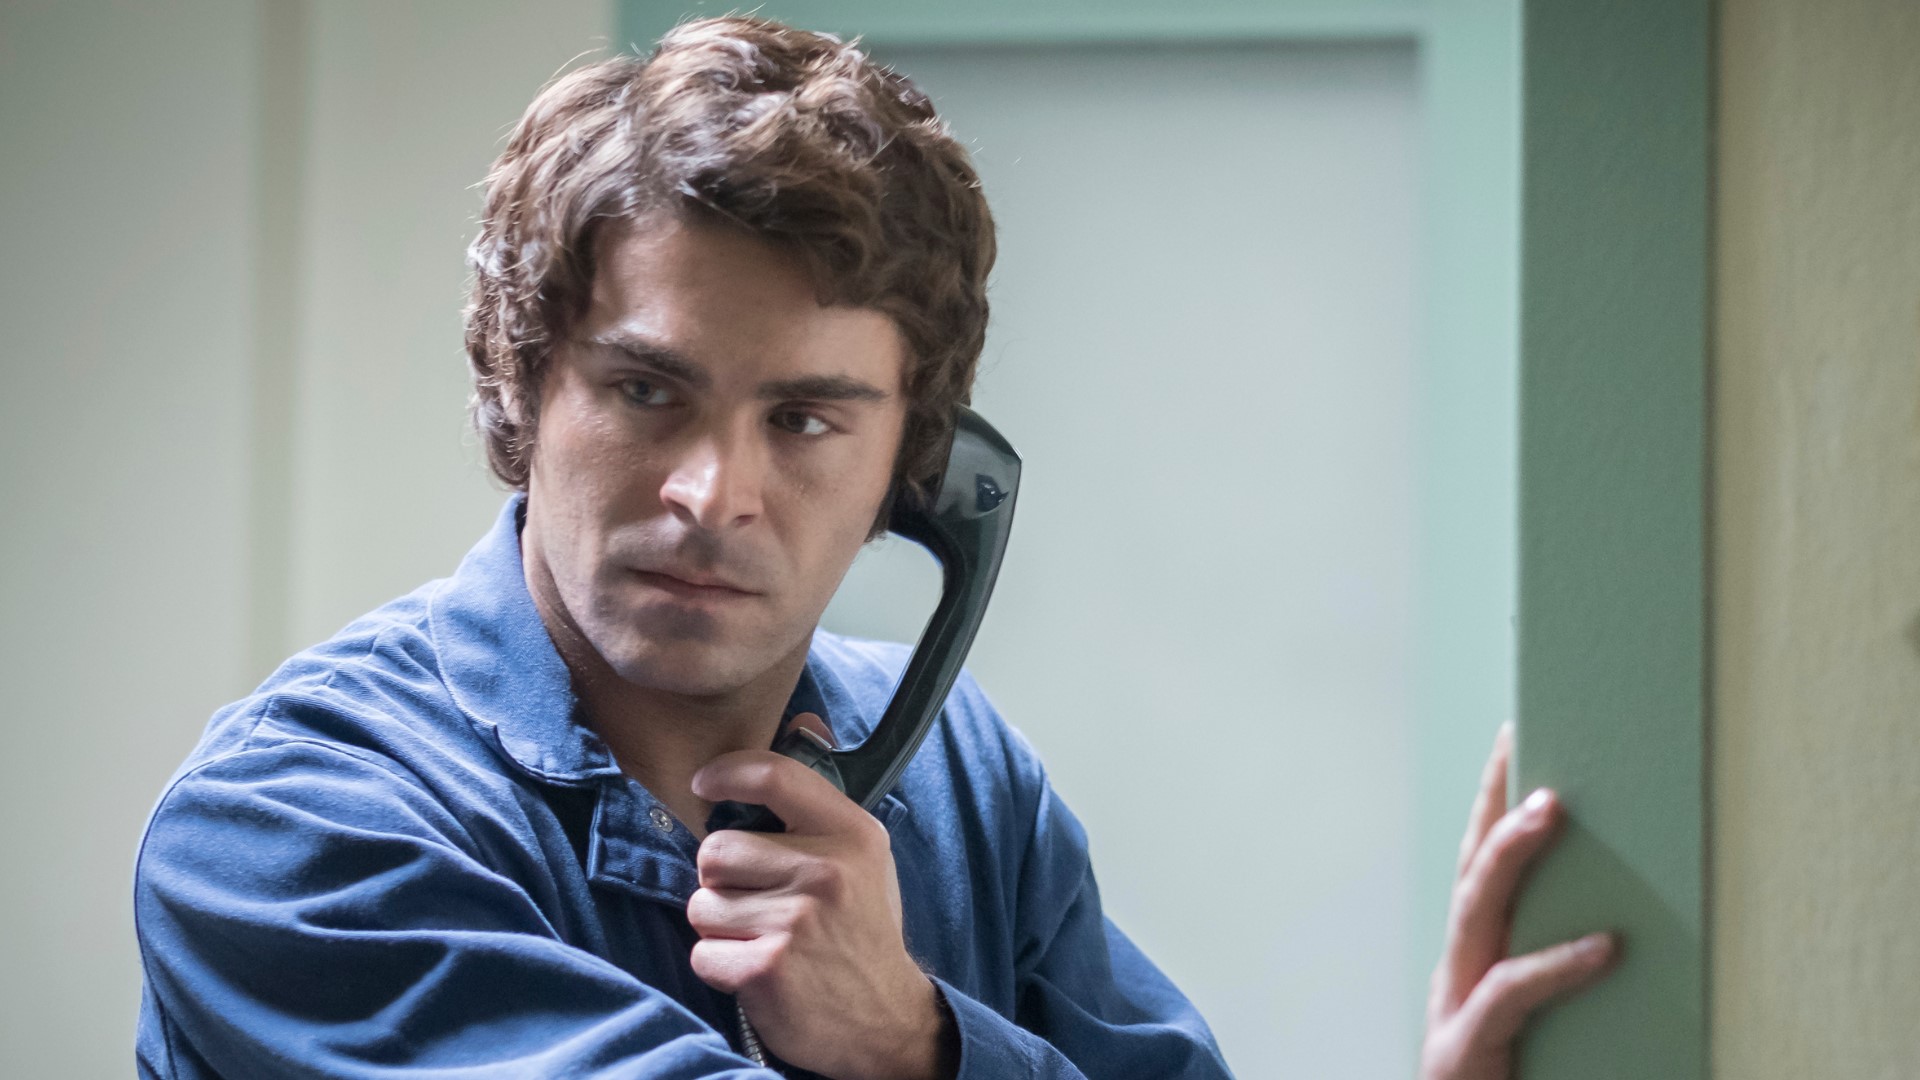 The Netflix movie stars Zac Efron as Ted Bundy, a well-known American serial killer who committed several crimes in the 1970s.